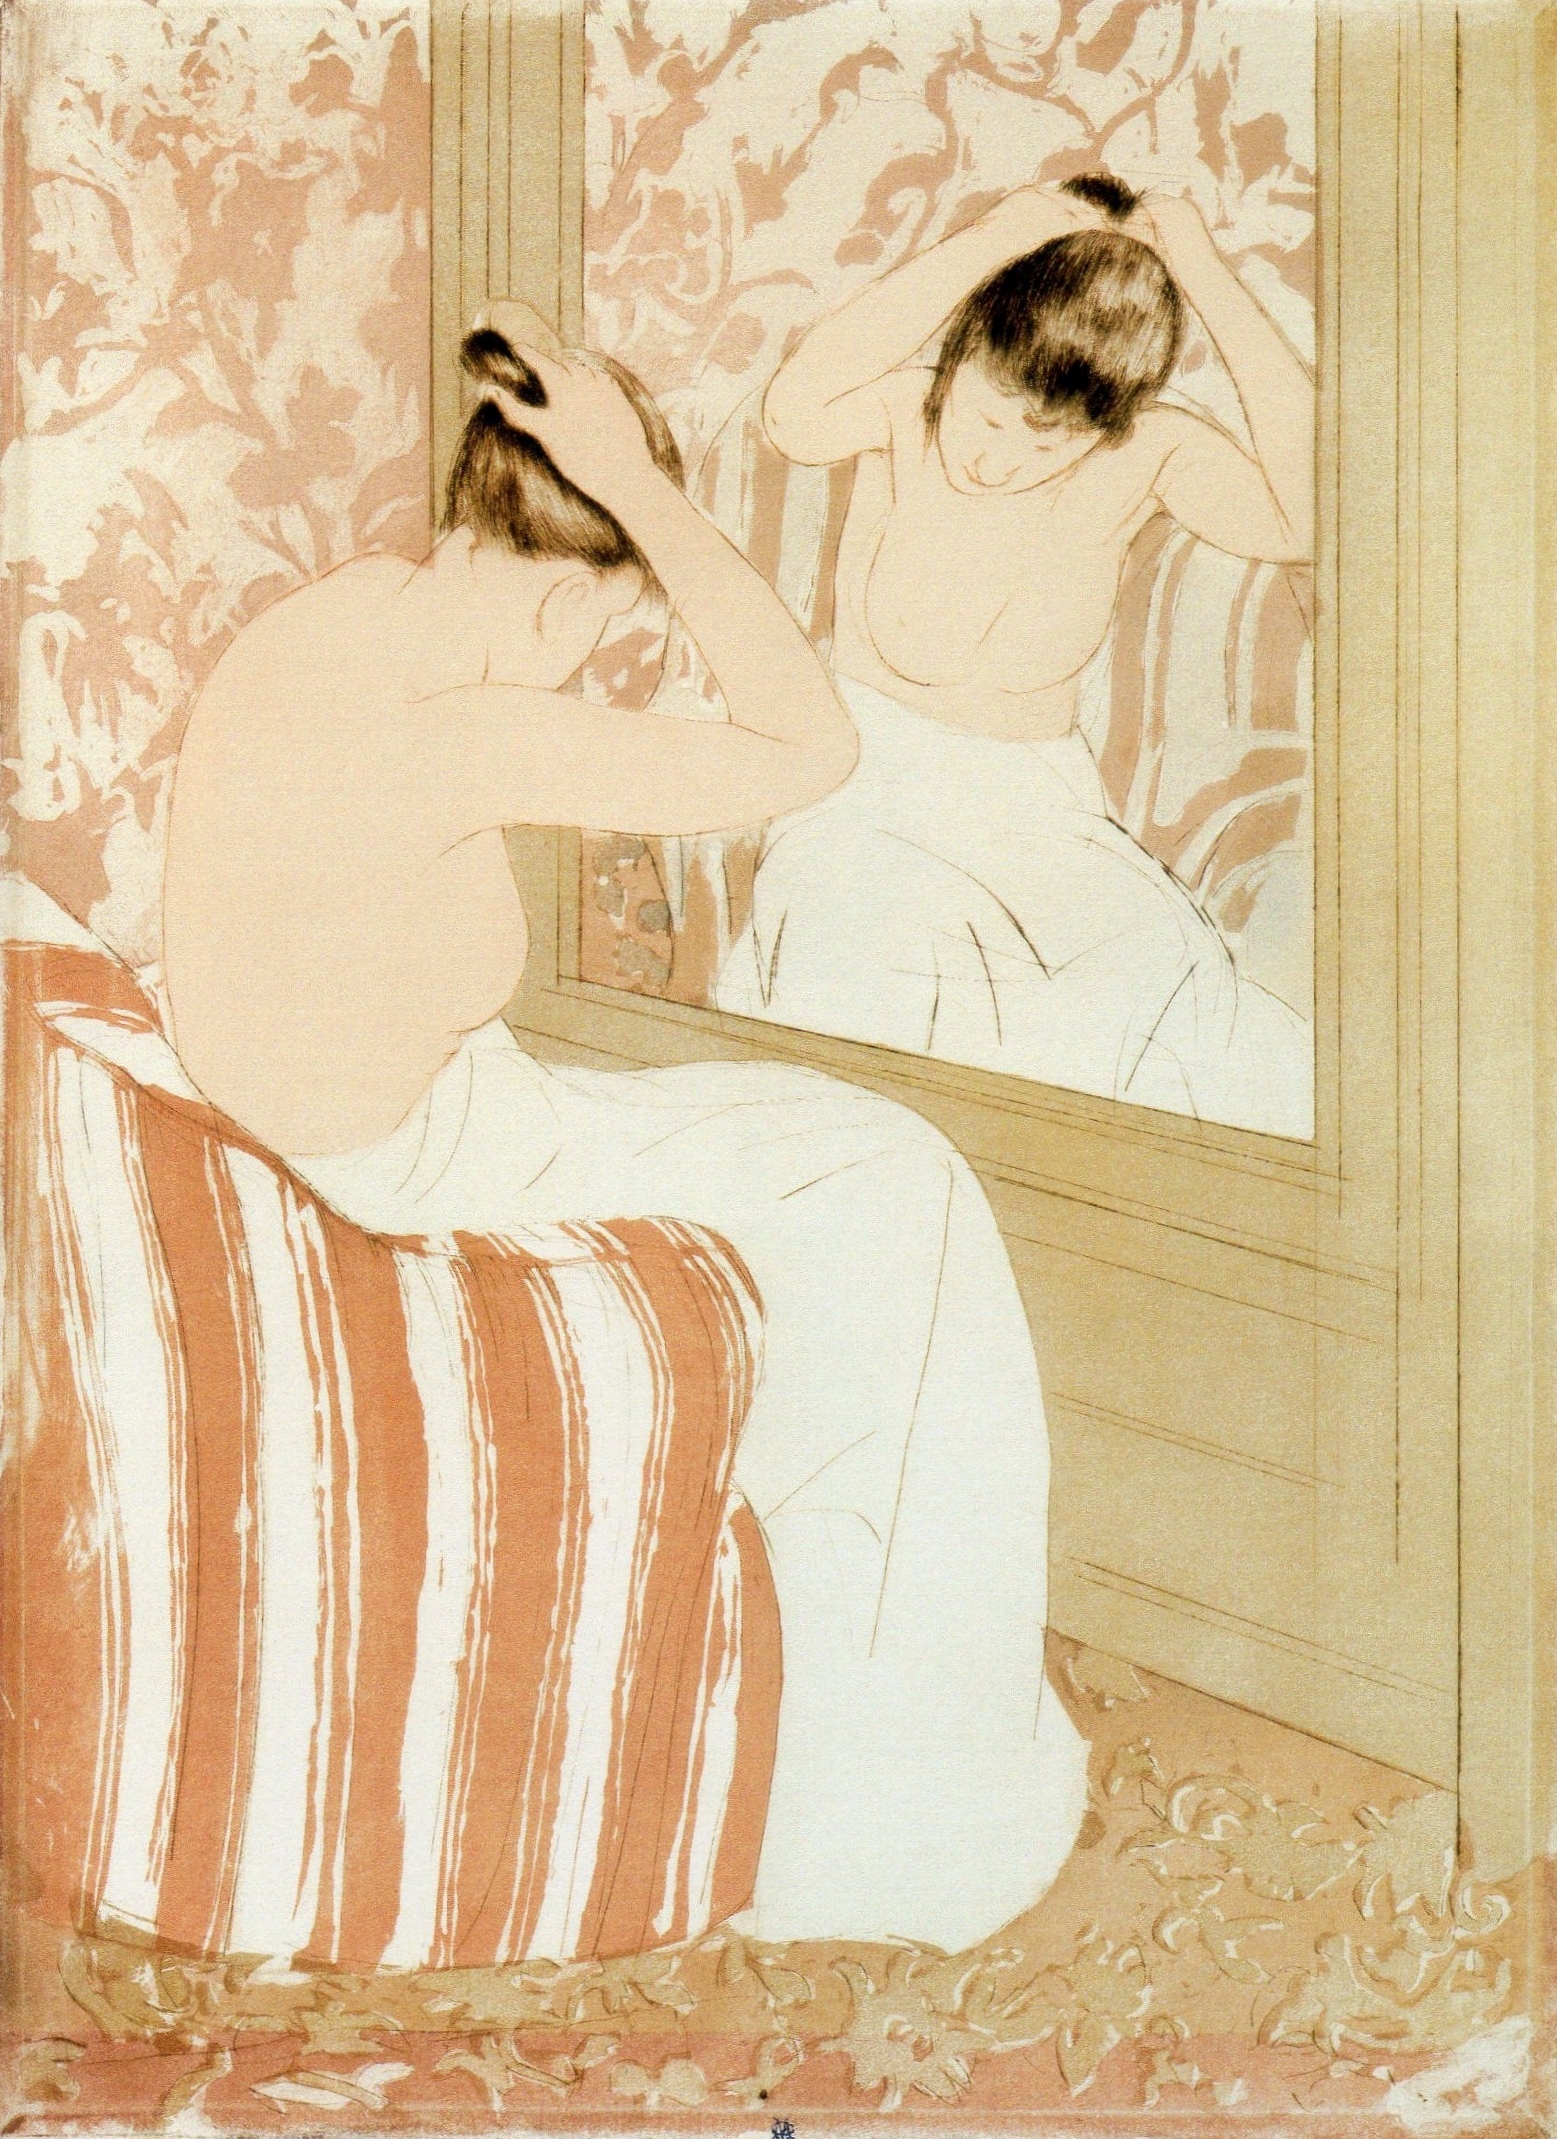 The Coiffure by Mary Cassatt - between 1890 and 1891 - 36.5 x 26.8 cm National Gallery of Canada